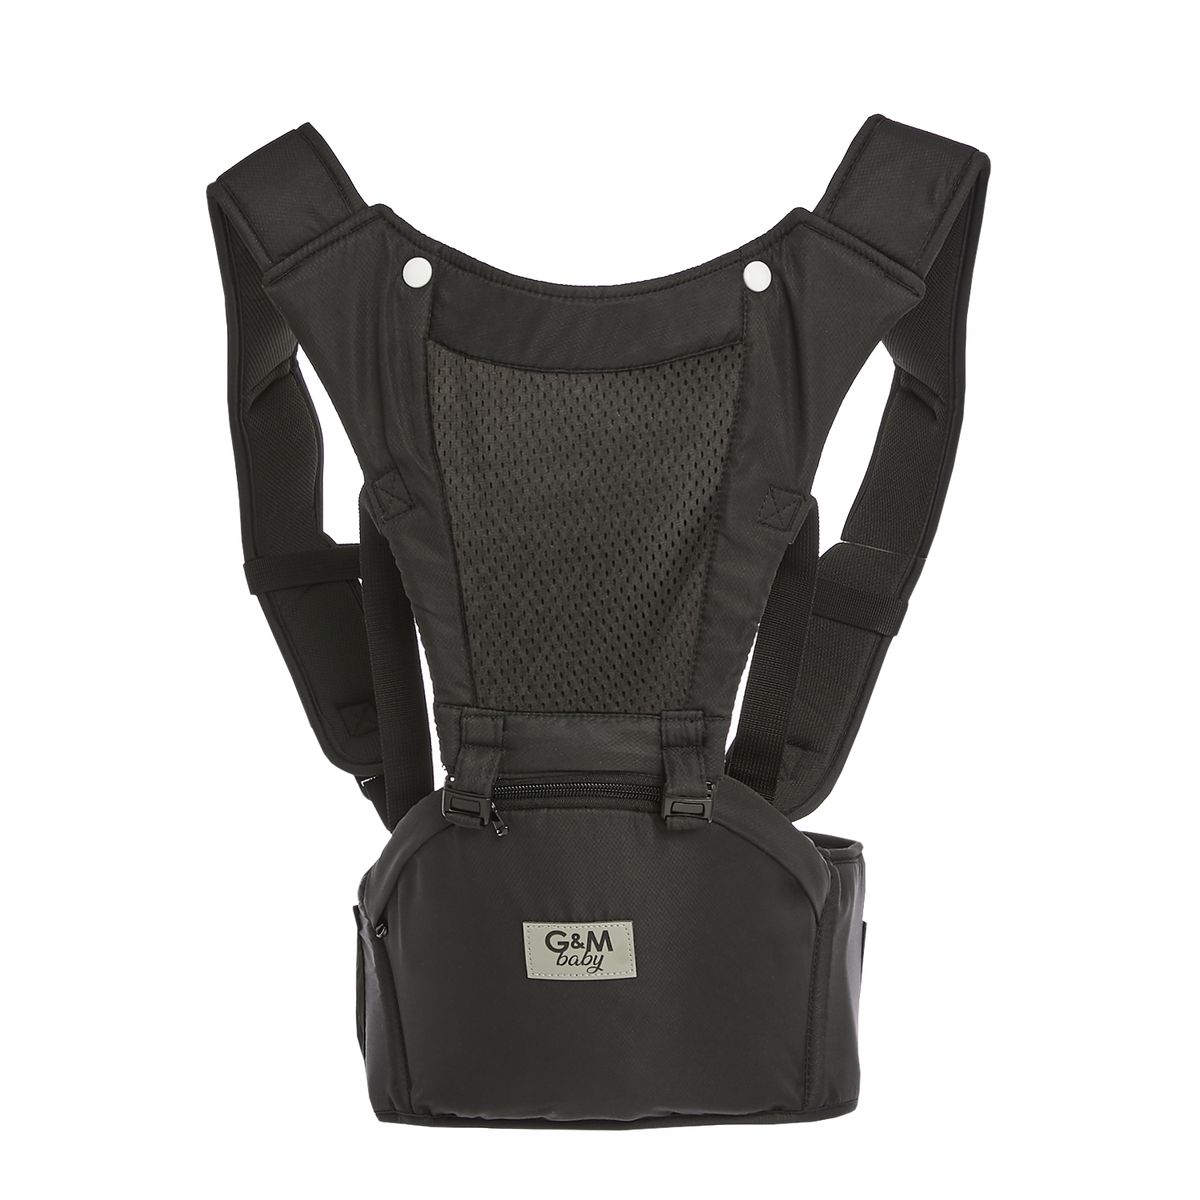 George & Mason Baby - 5-in-1 Baby Carrier | Shop Today. Get it Tomorrow ...